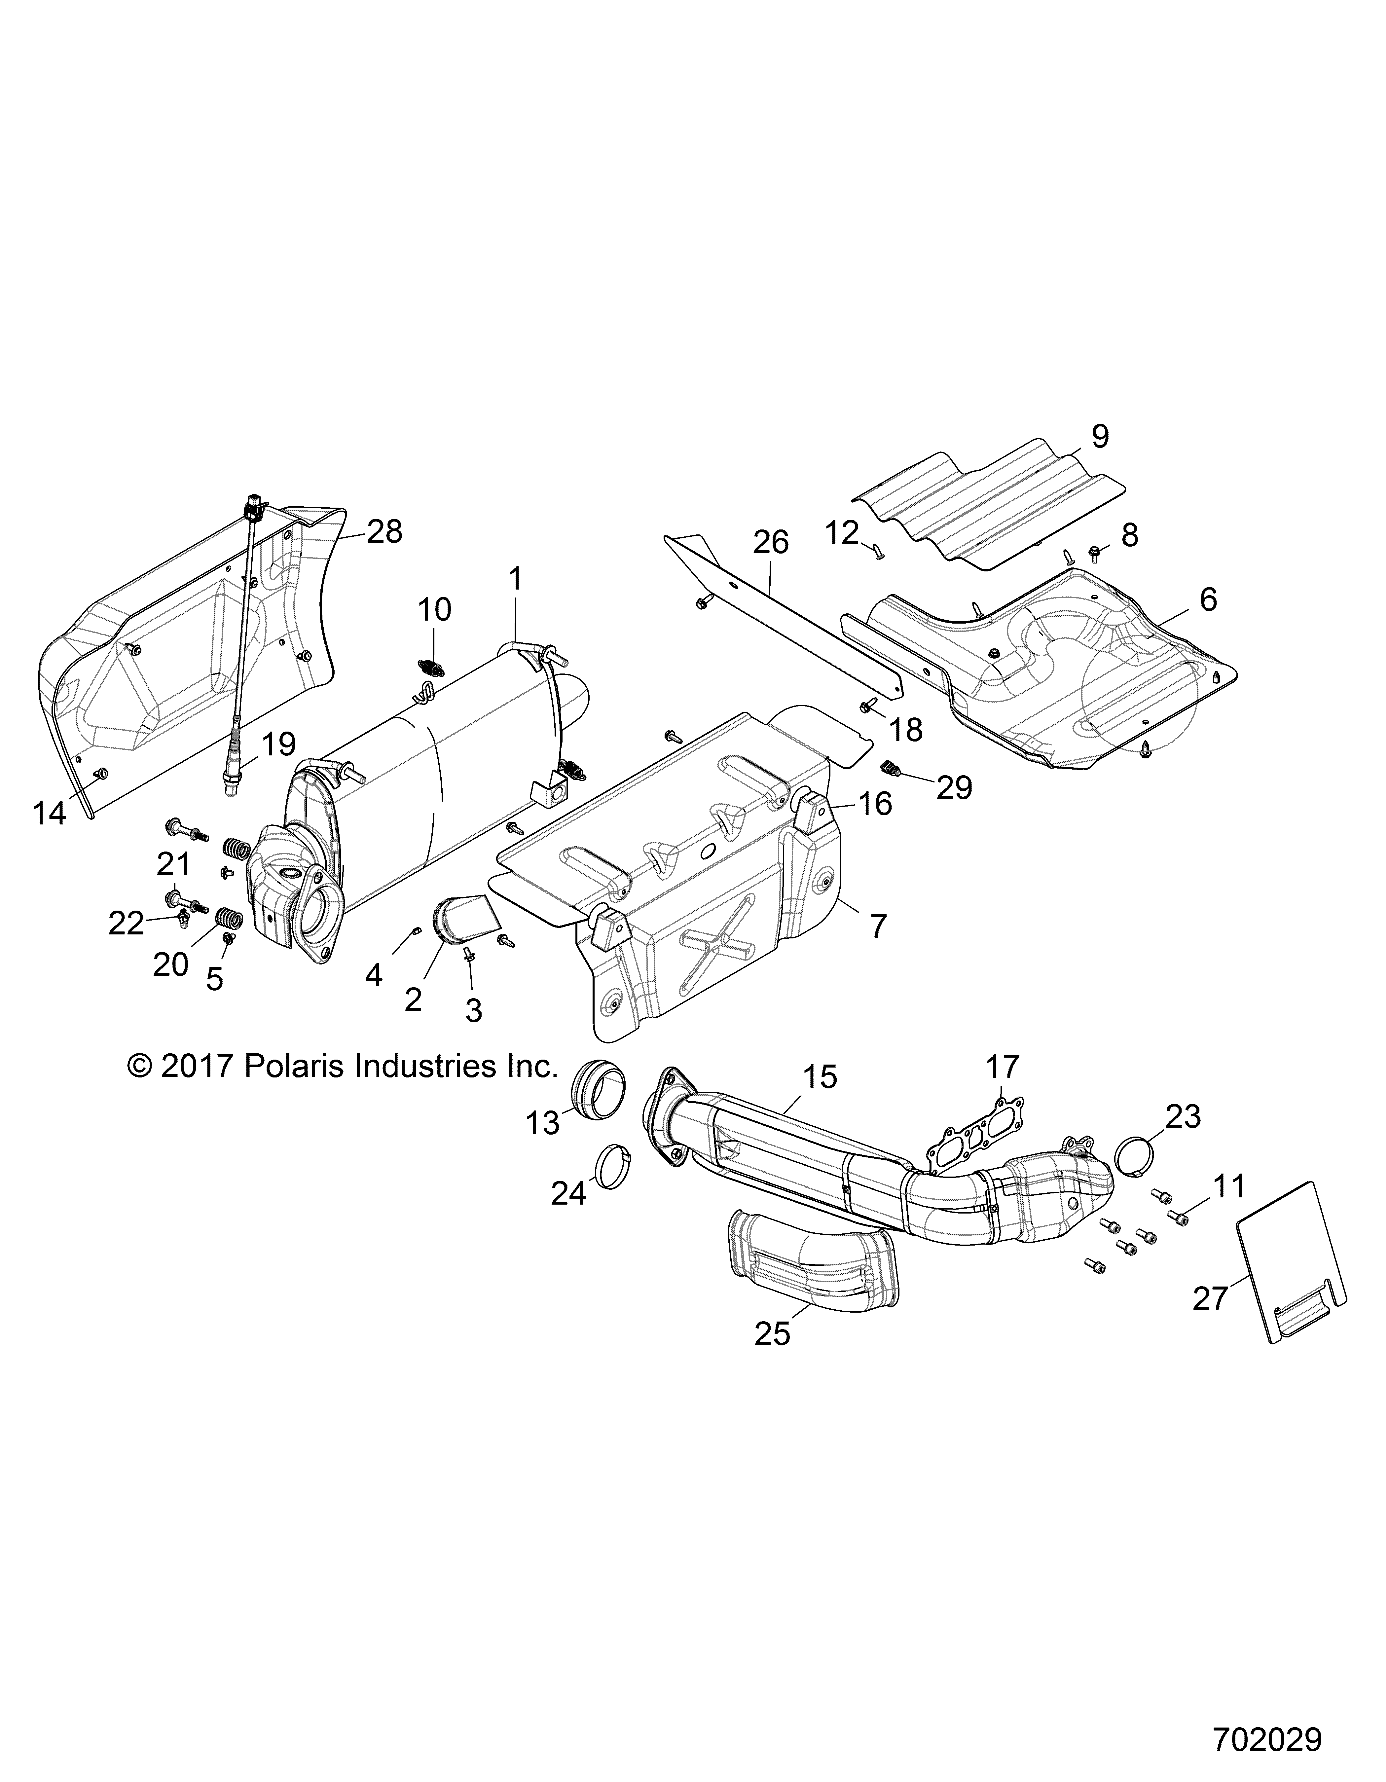 ENGINE, EXHAUST SYSTEM - Z18VDE99NK (702029)